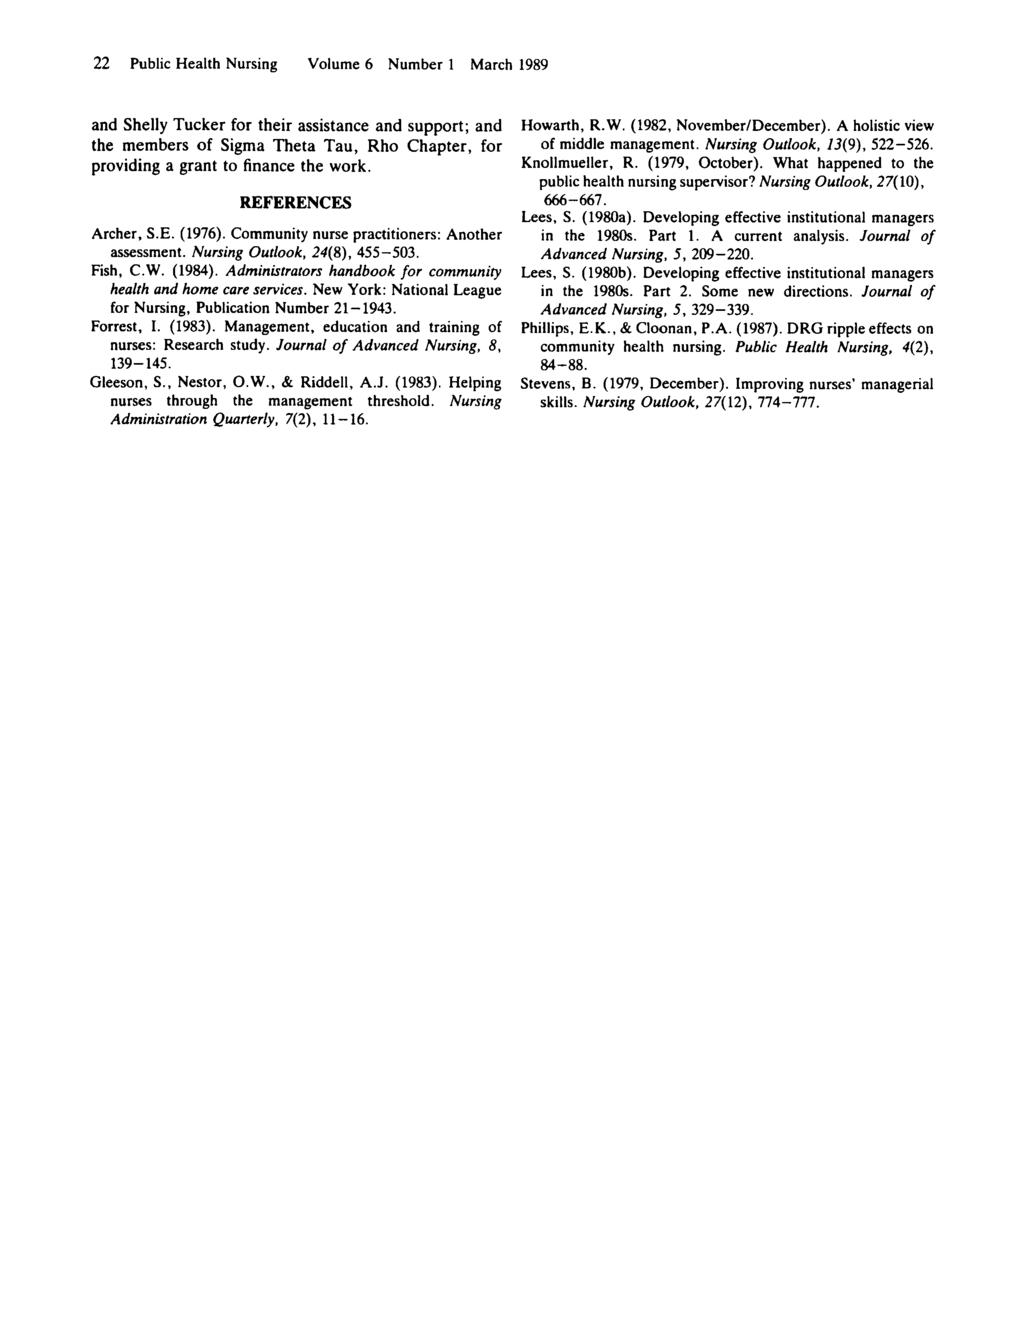 22 Public Health Nursing Volume 6 Number 1 March 1989 and Shelly Tucker for their assistance and support; and the members of Sigma Theta Tau, Rho Chapter, for providing a grant to finance the work.